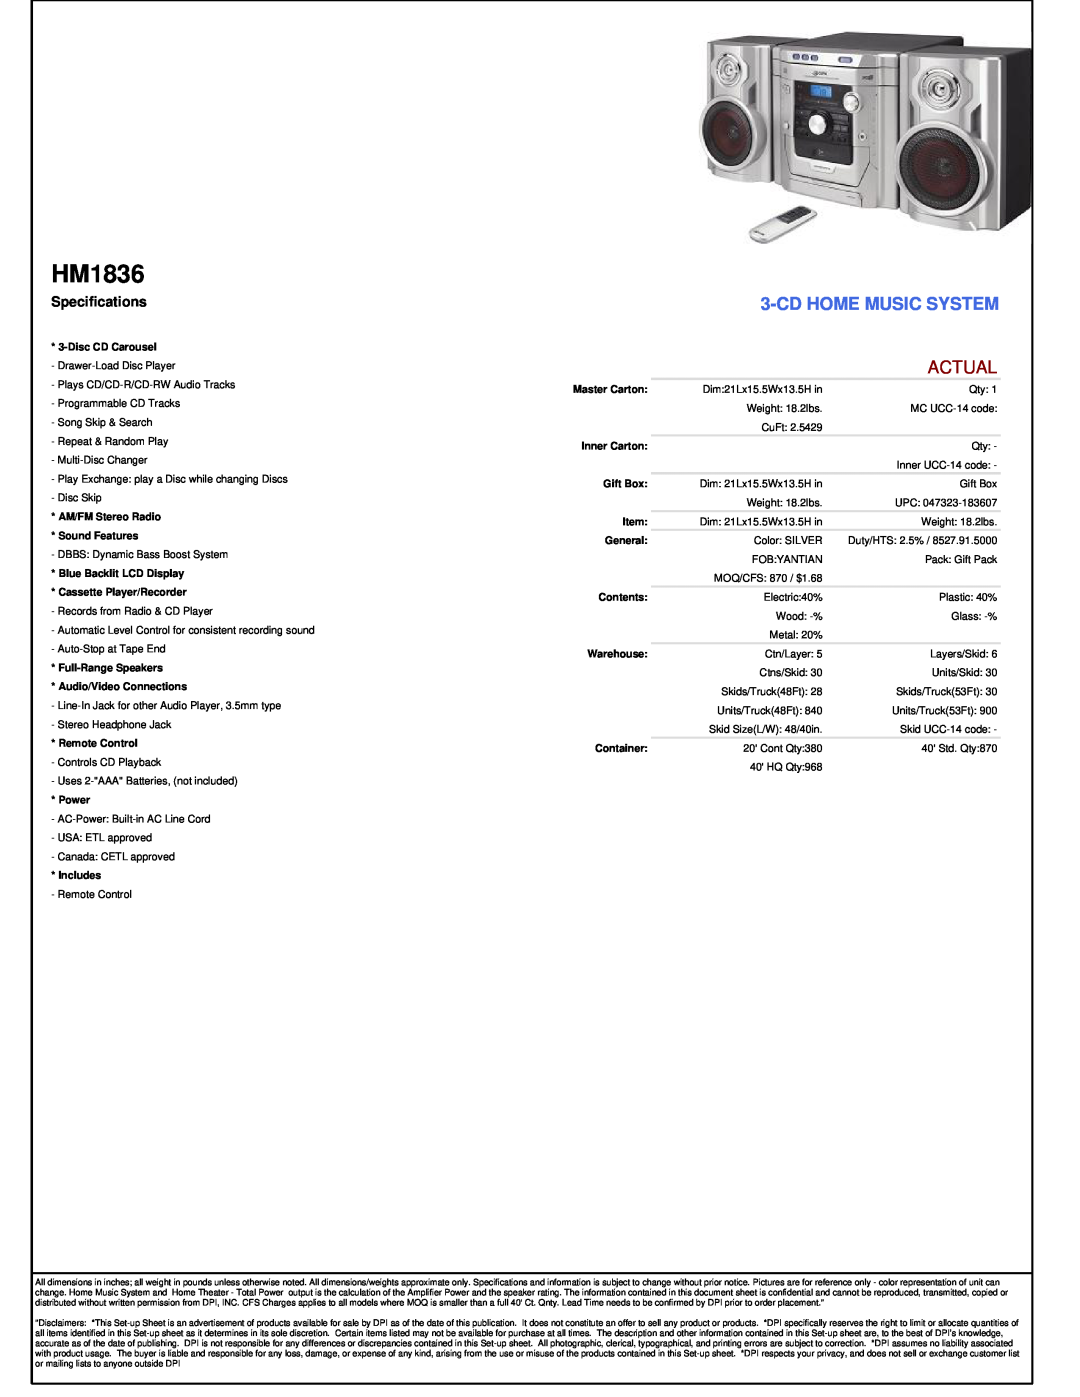 GPX HM1836 manual Cdhome Music System, Actual, Specifications 